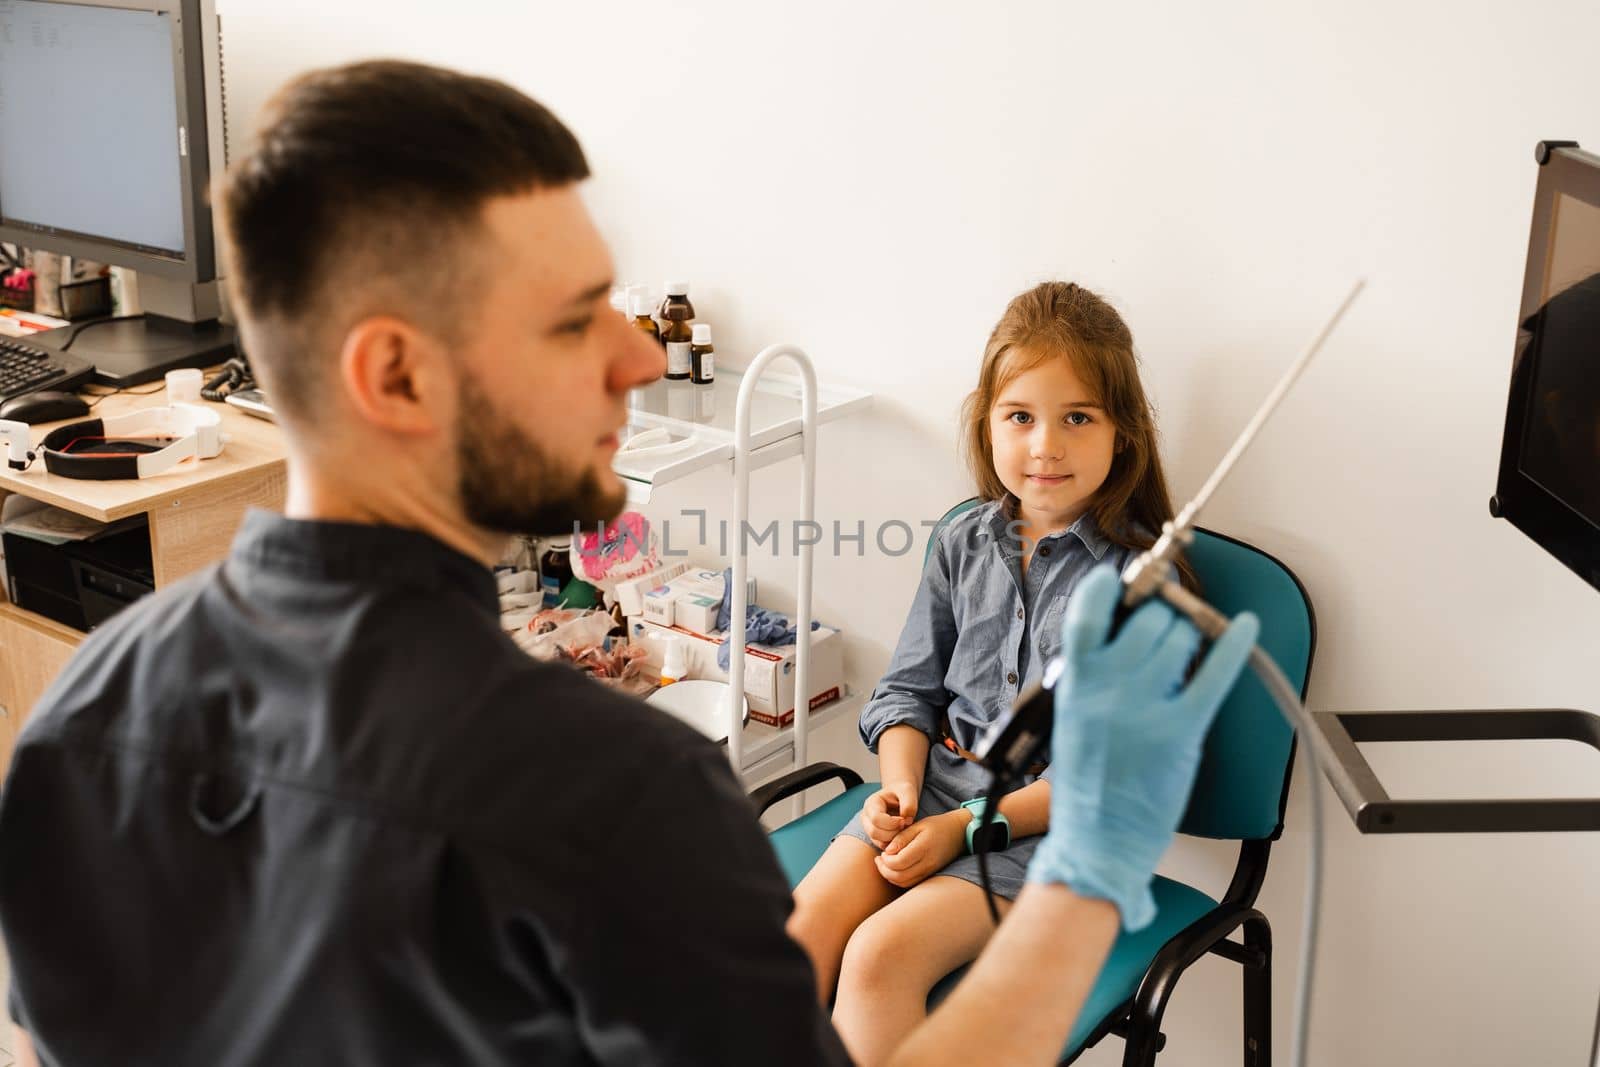 Doctor otolaryngologist with rhinoscope for endoscopy. Child consultation before nasal endoscopy. Examination of child nose and diagnosis of disease